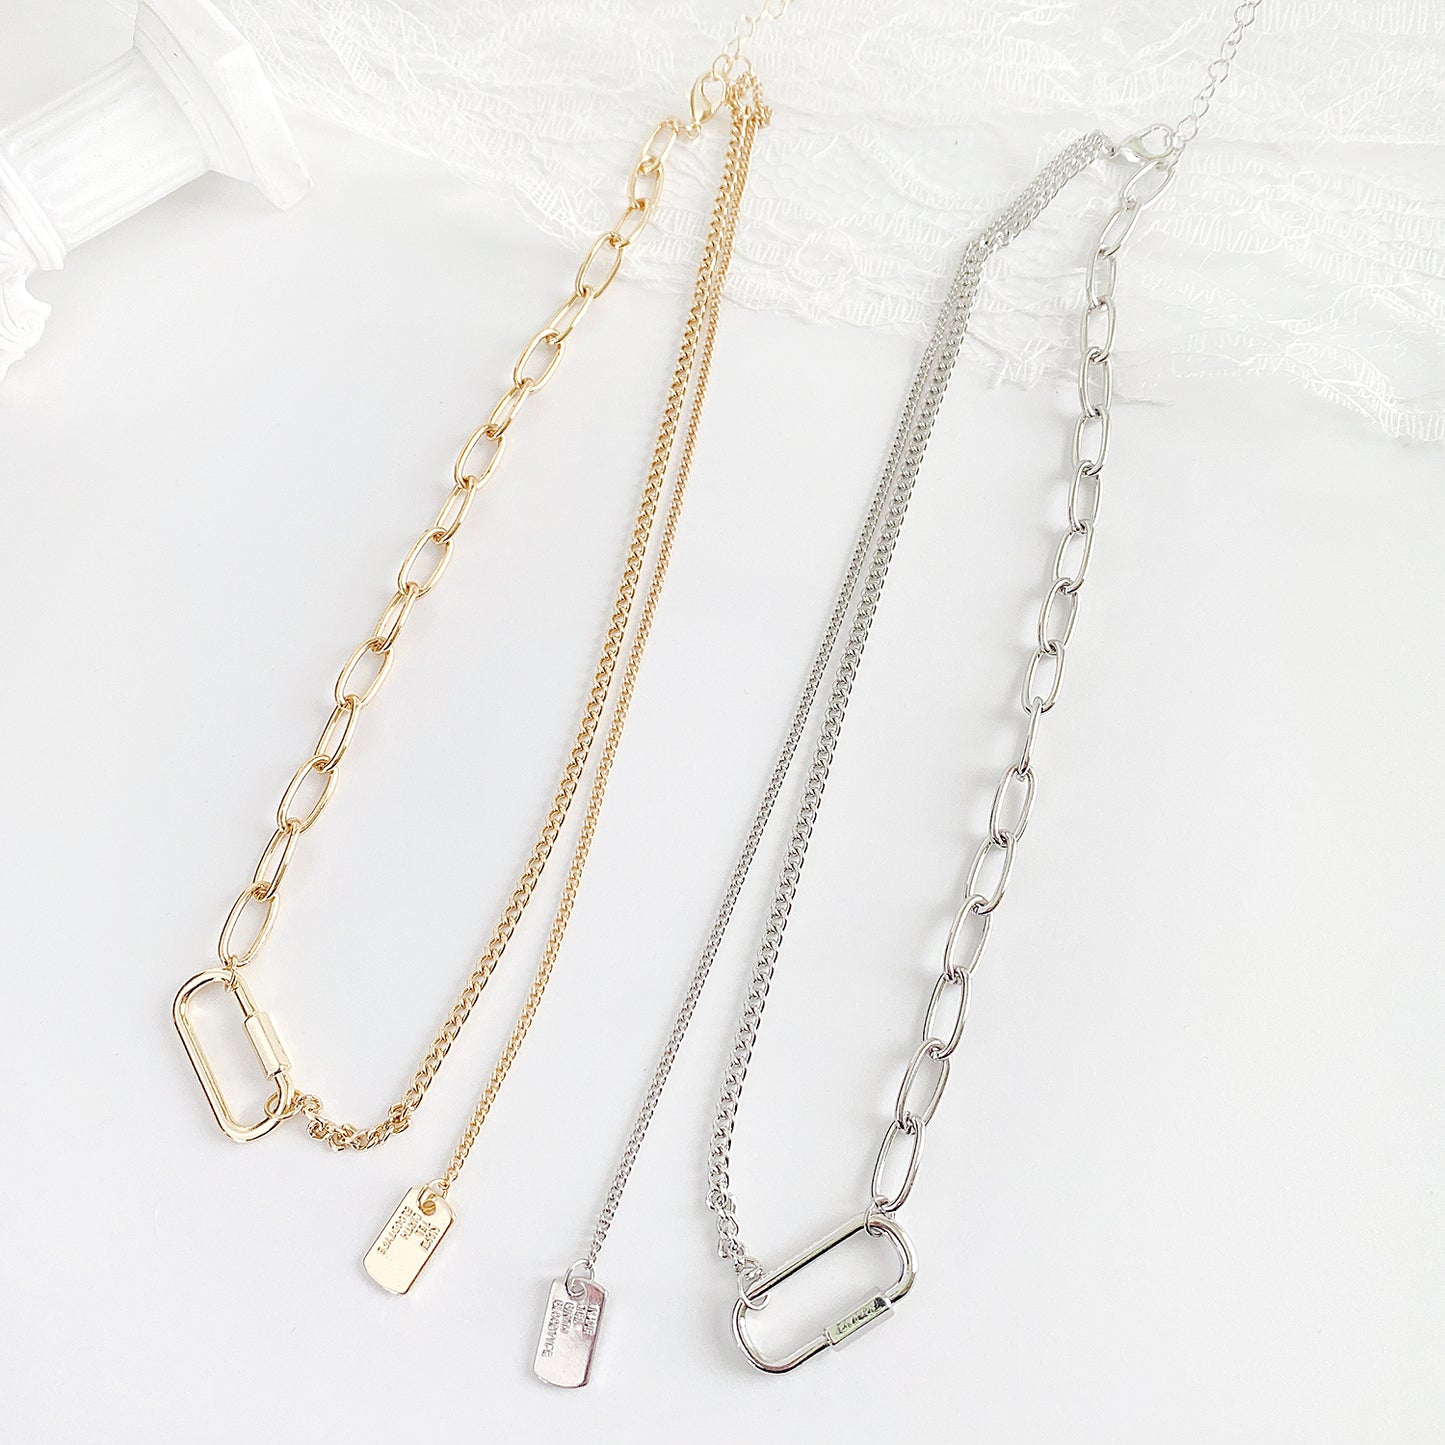 Mini Dog Tag Asymmetry Chain Necklace - YOUAREMYPOISON